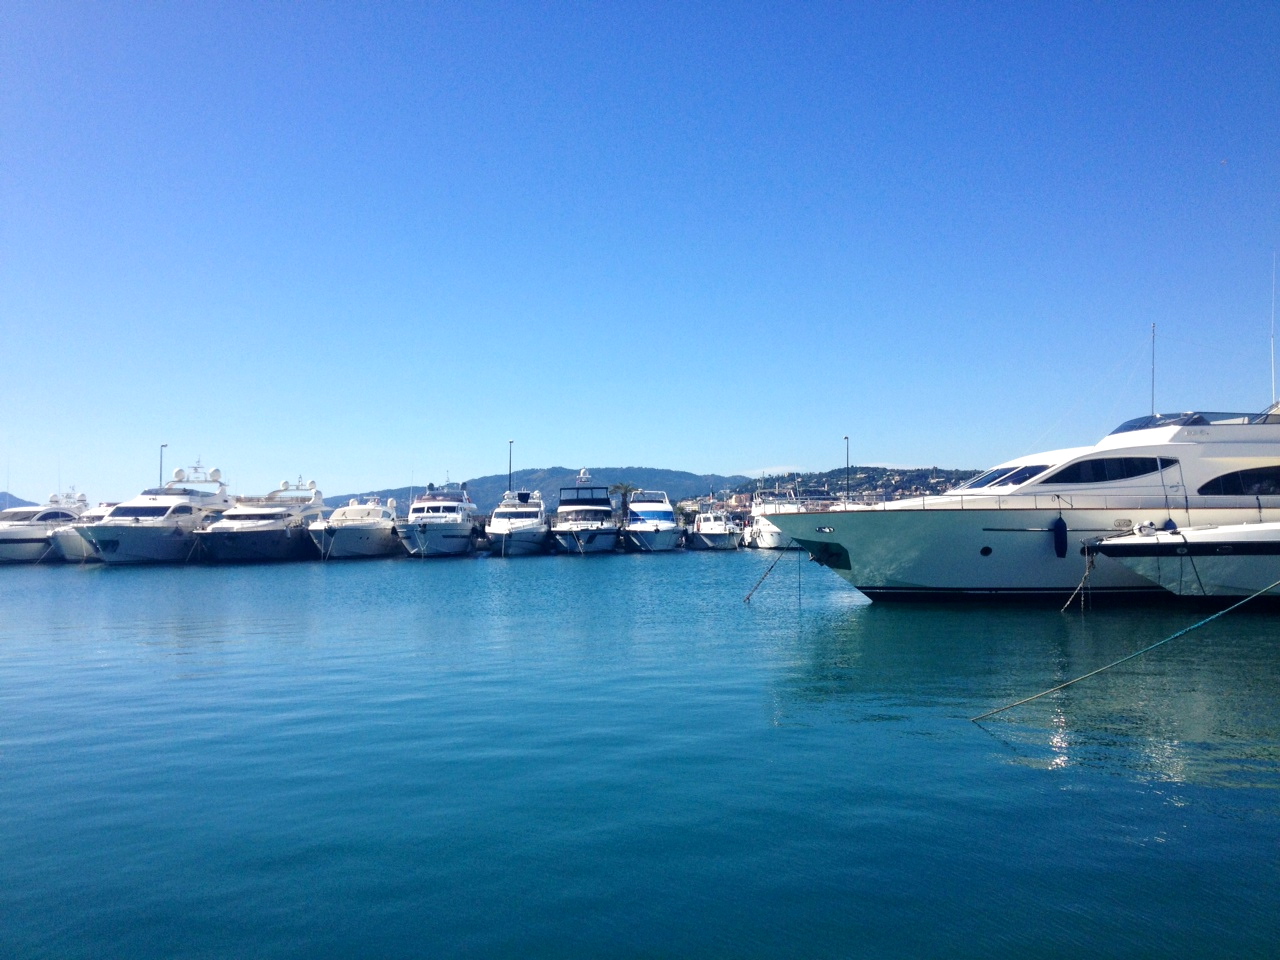 A crisp clear day on the Cote d'Azur